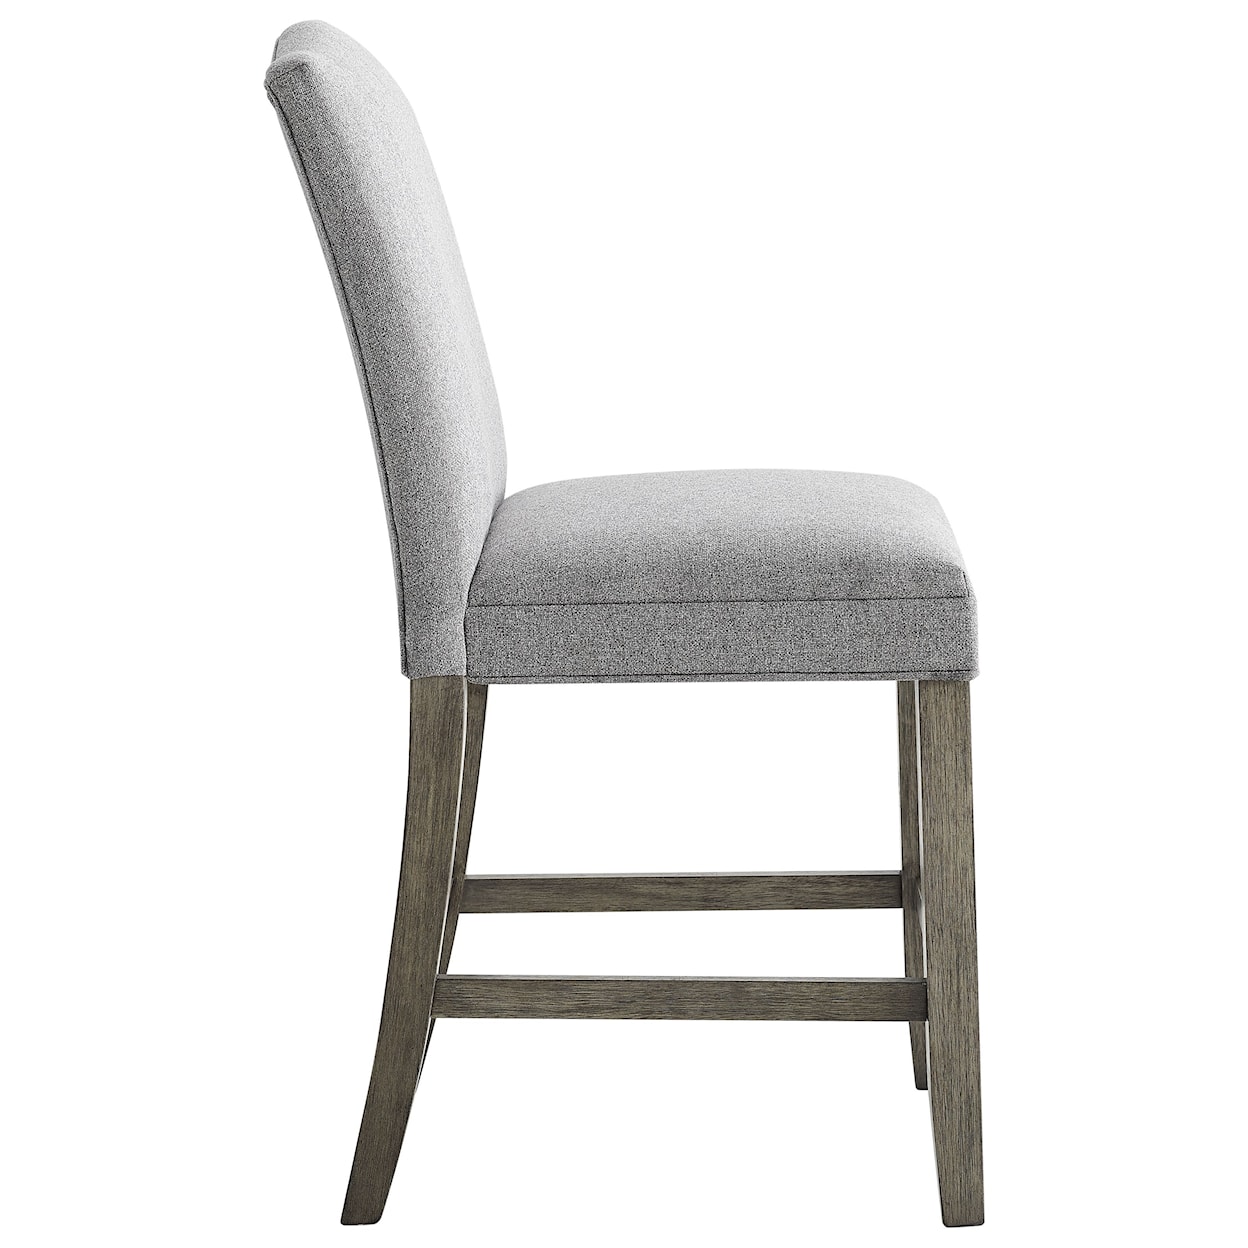 Prime Grayson Upholstered Counter Height Chair